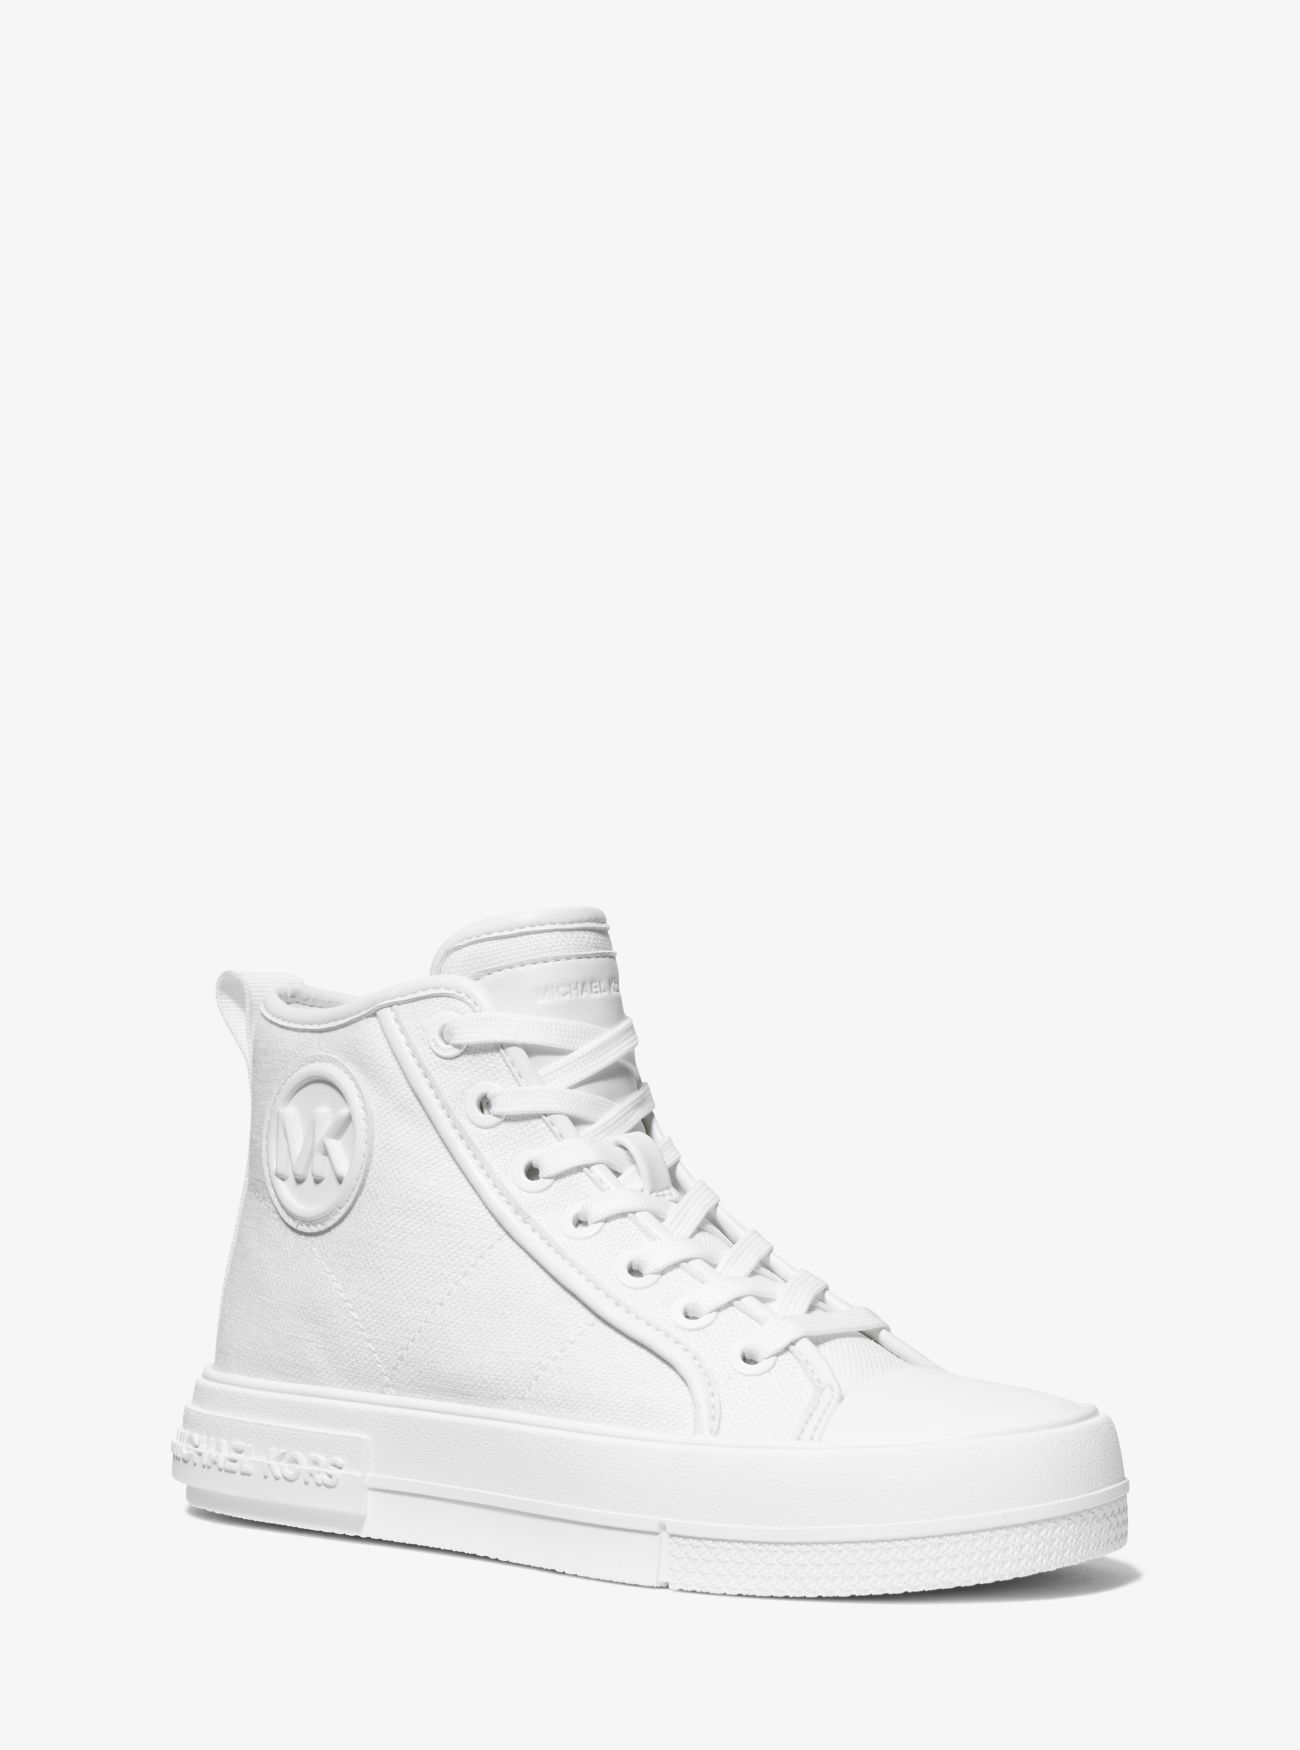 MK Evy Canvas High-Top Trainers - Optic White - Michael Kors